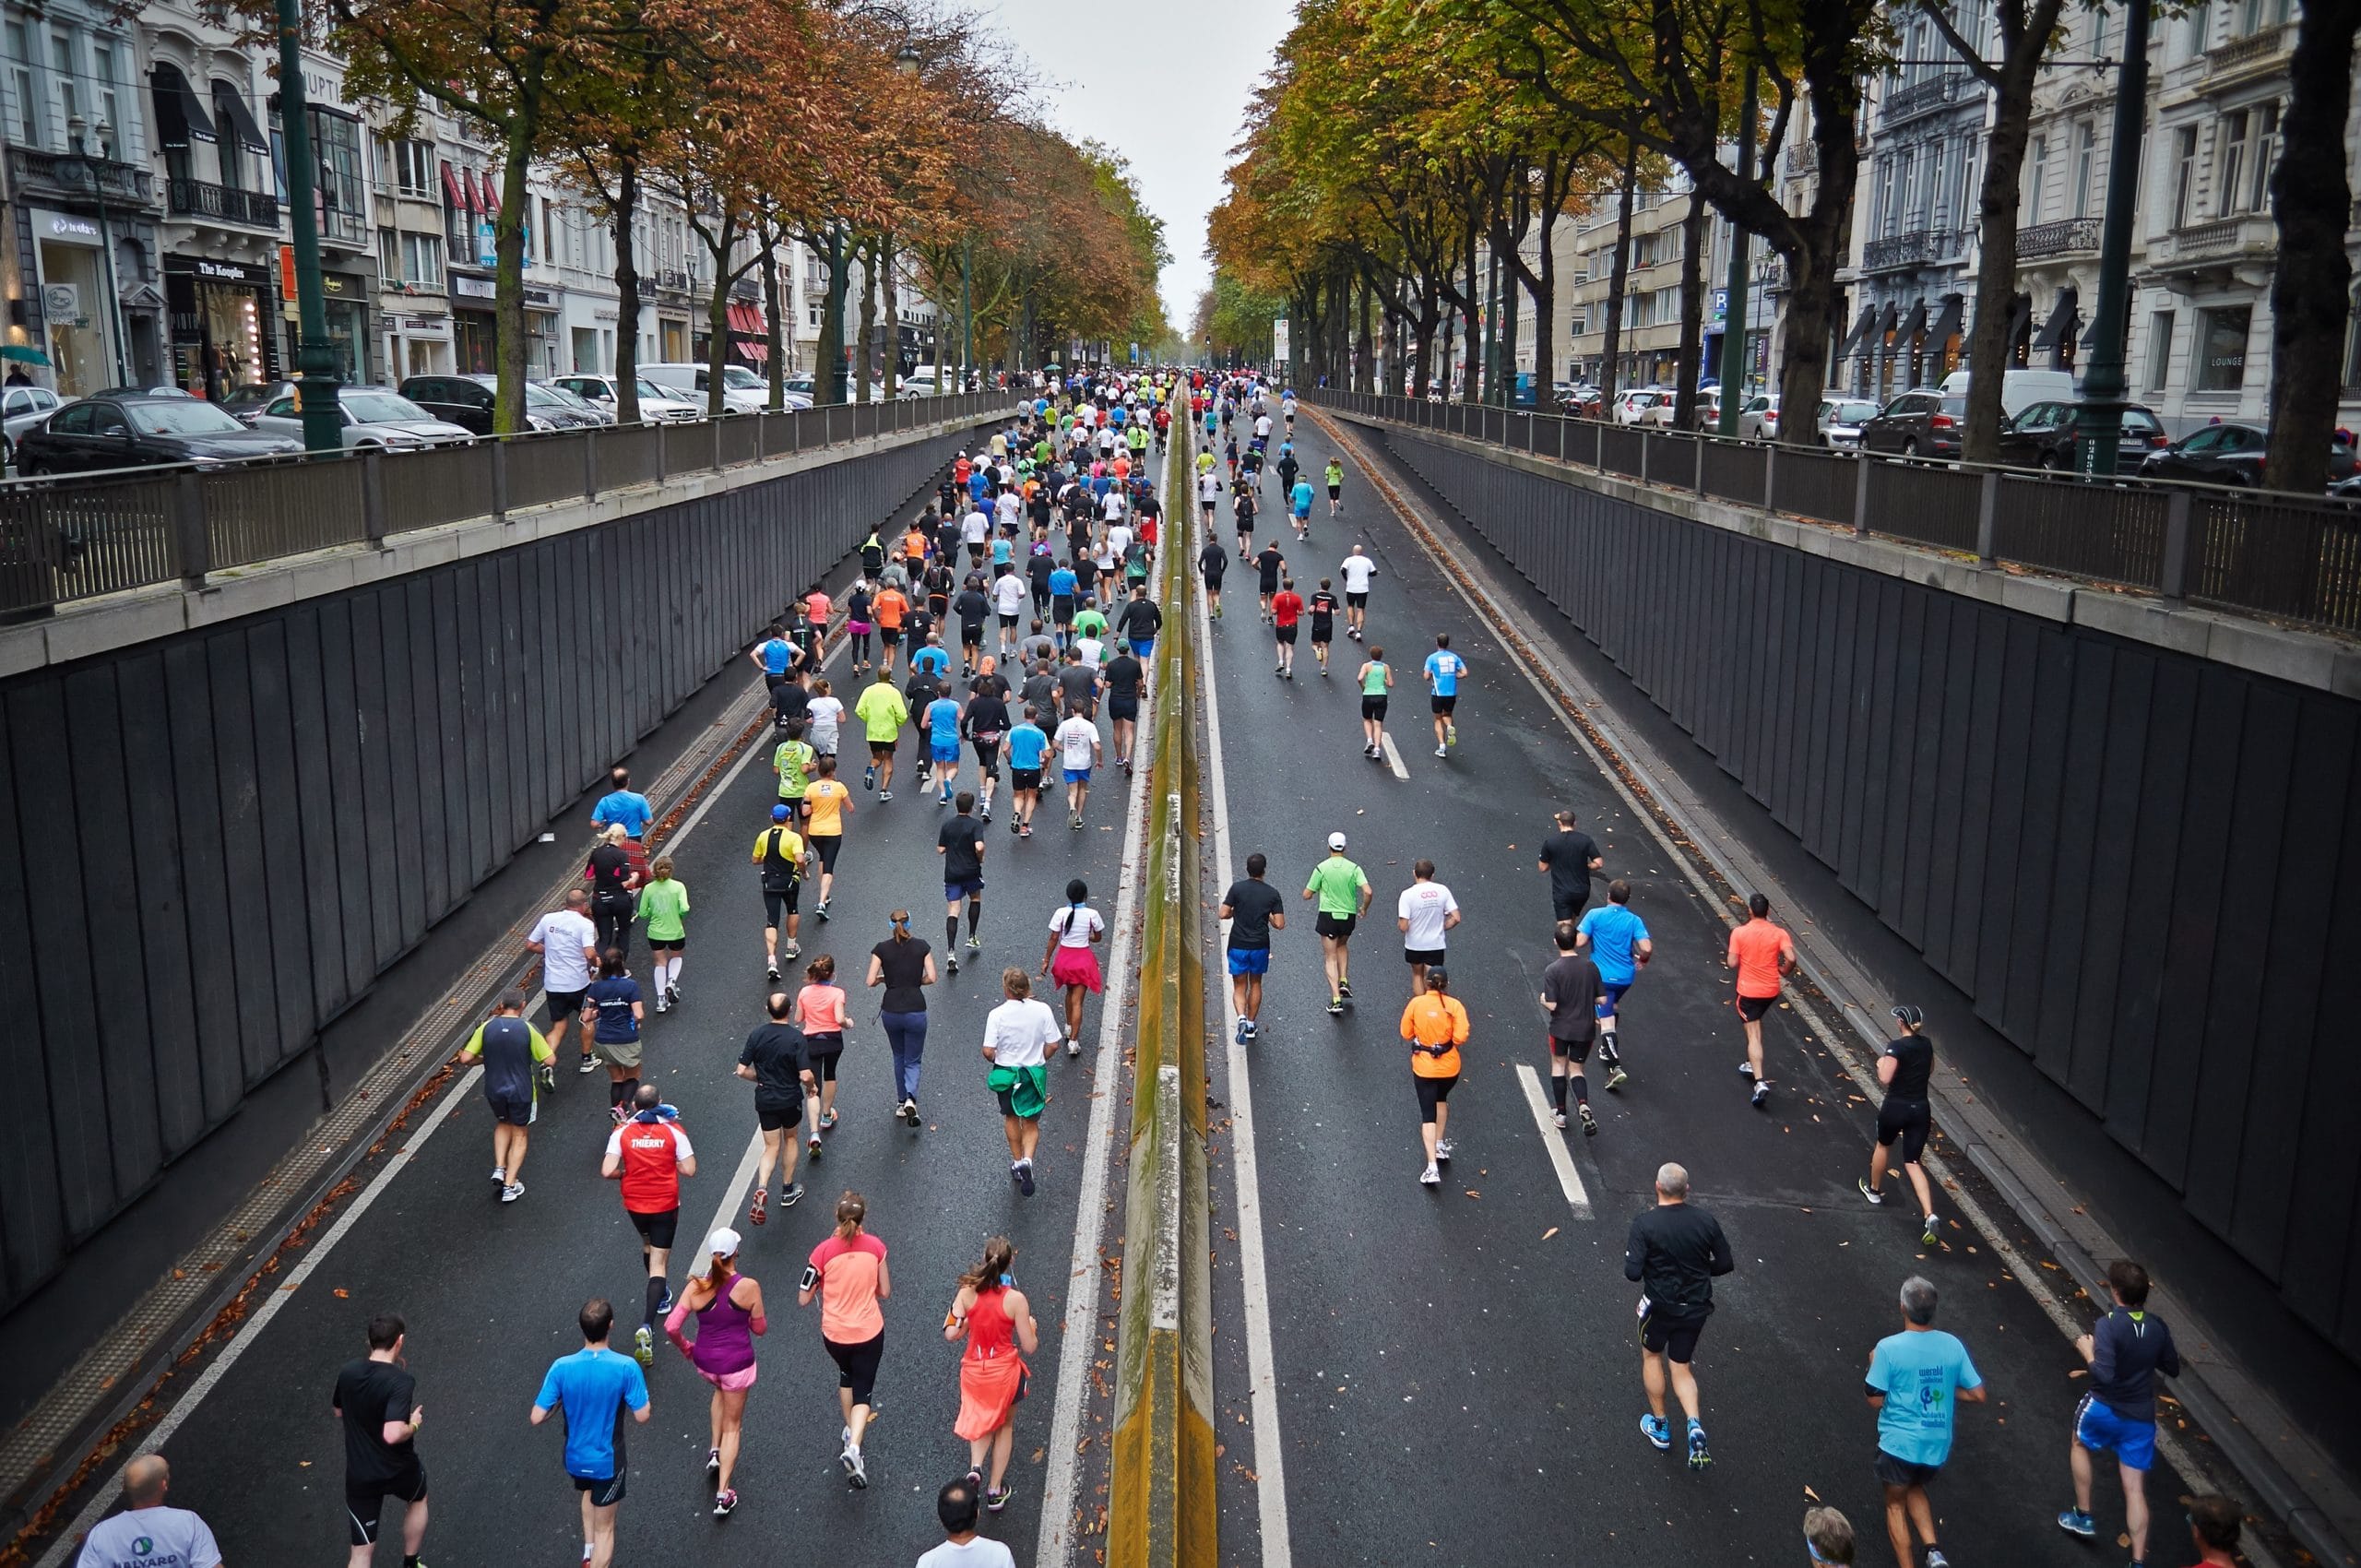 running a marathon takes work over time, just like marketing your bed & breakfast